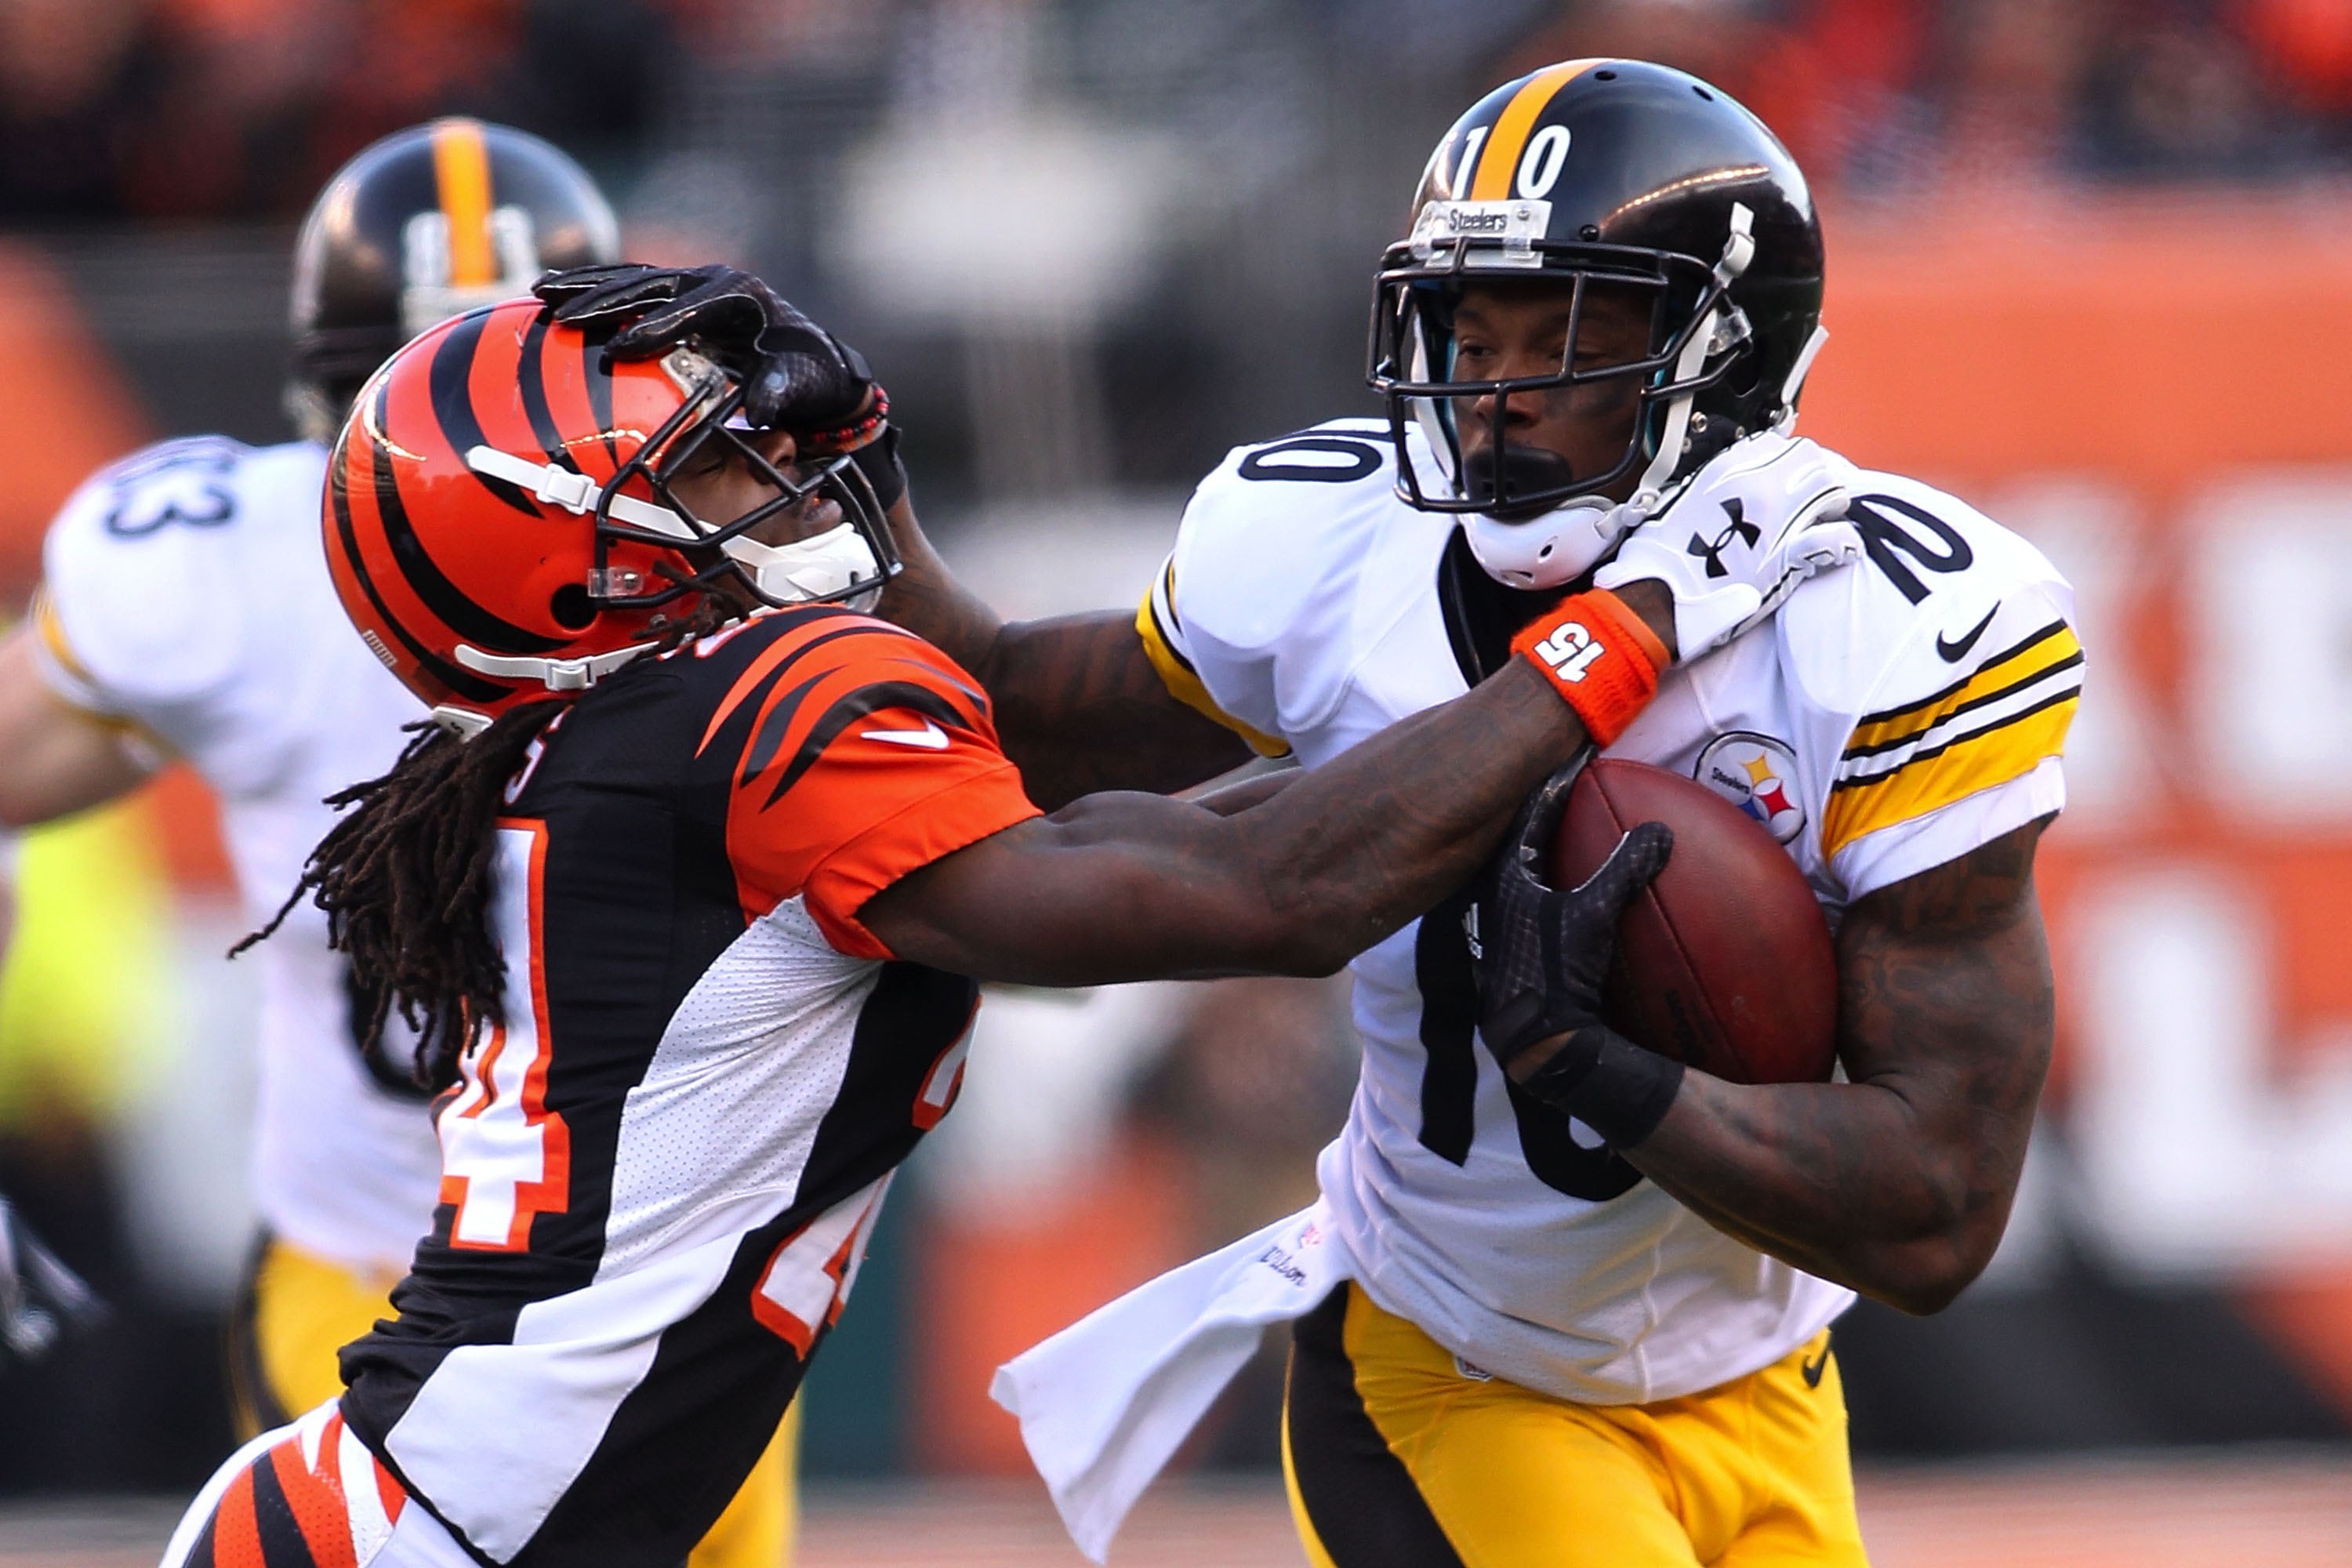 Bengals vs. Steelers Score, Stats & Highlights